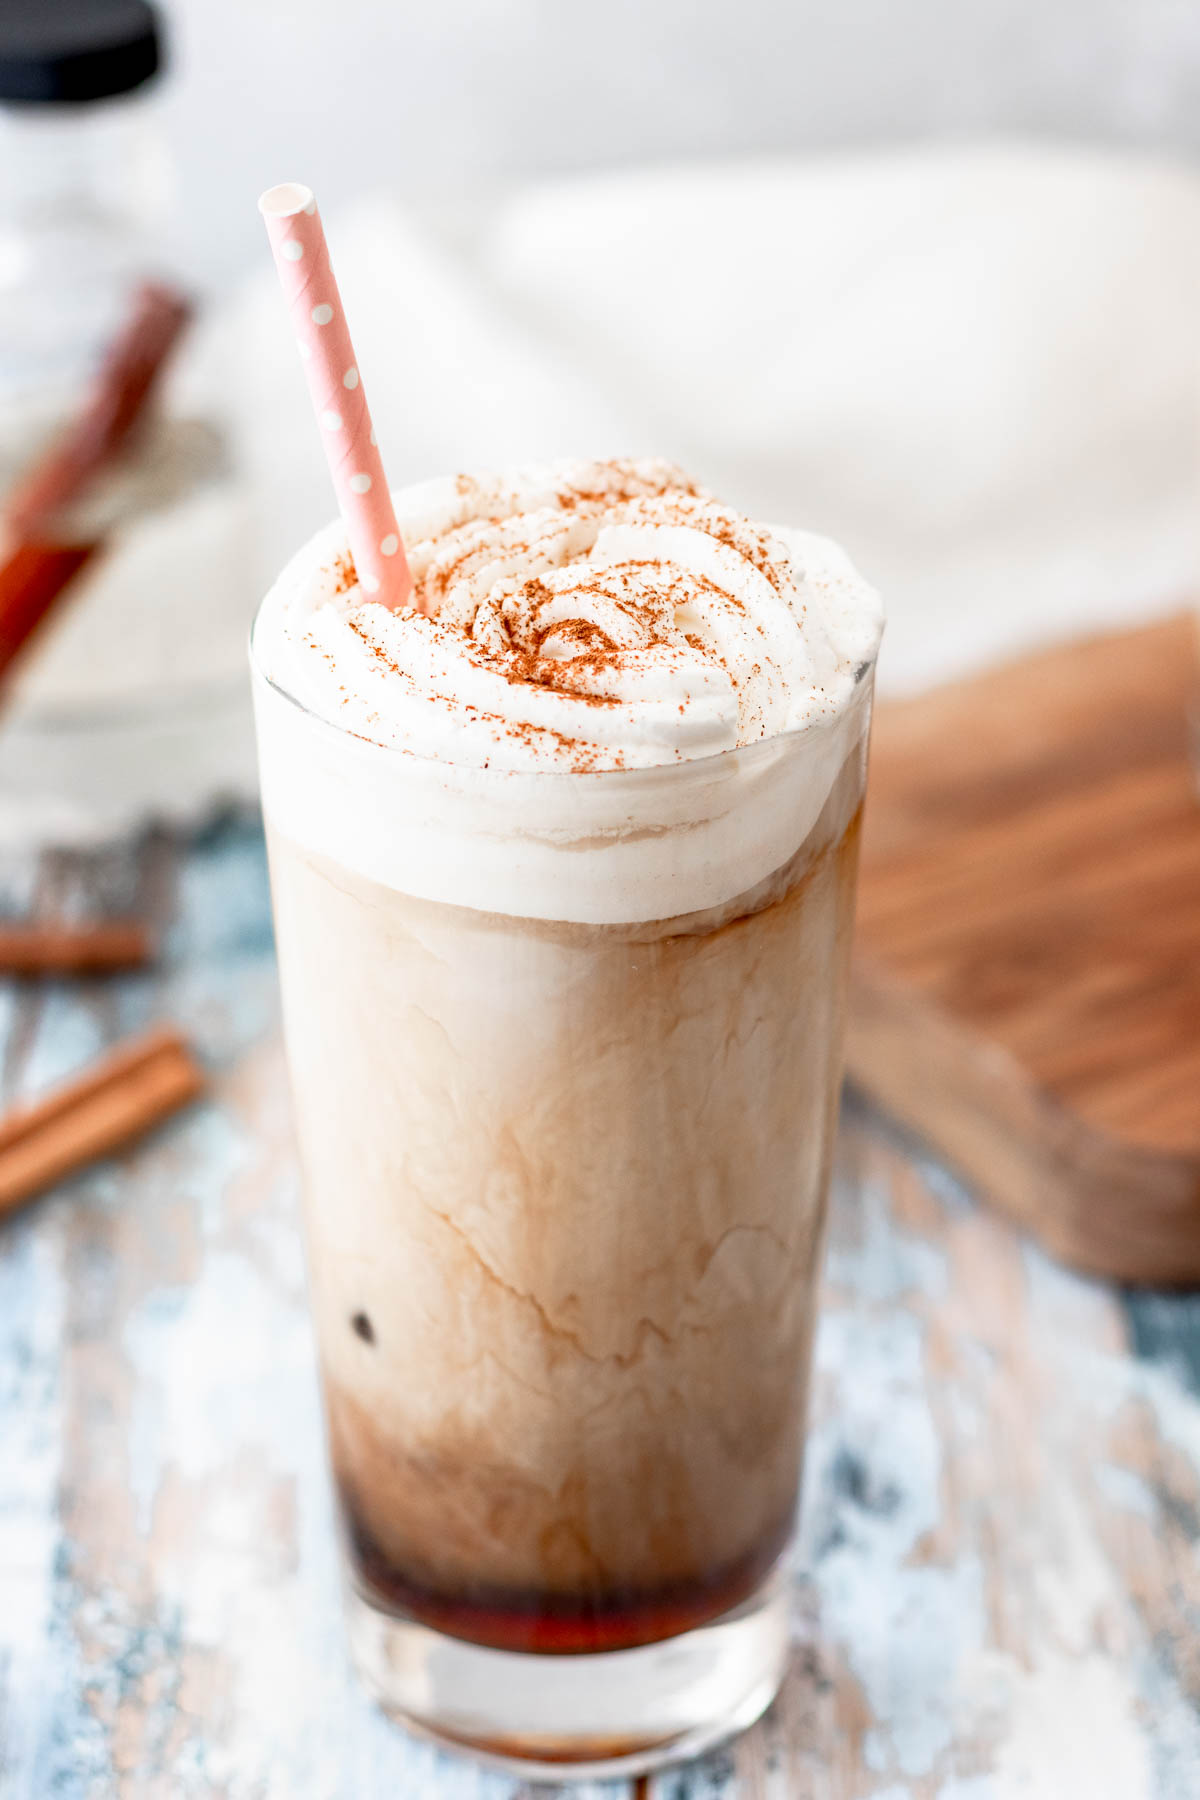 angled top view of a prepared glass of iced coffee with whipped cream topping and a dusting of cinnamon